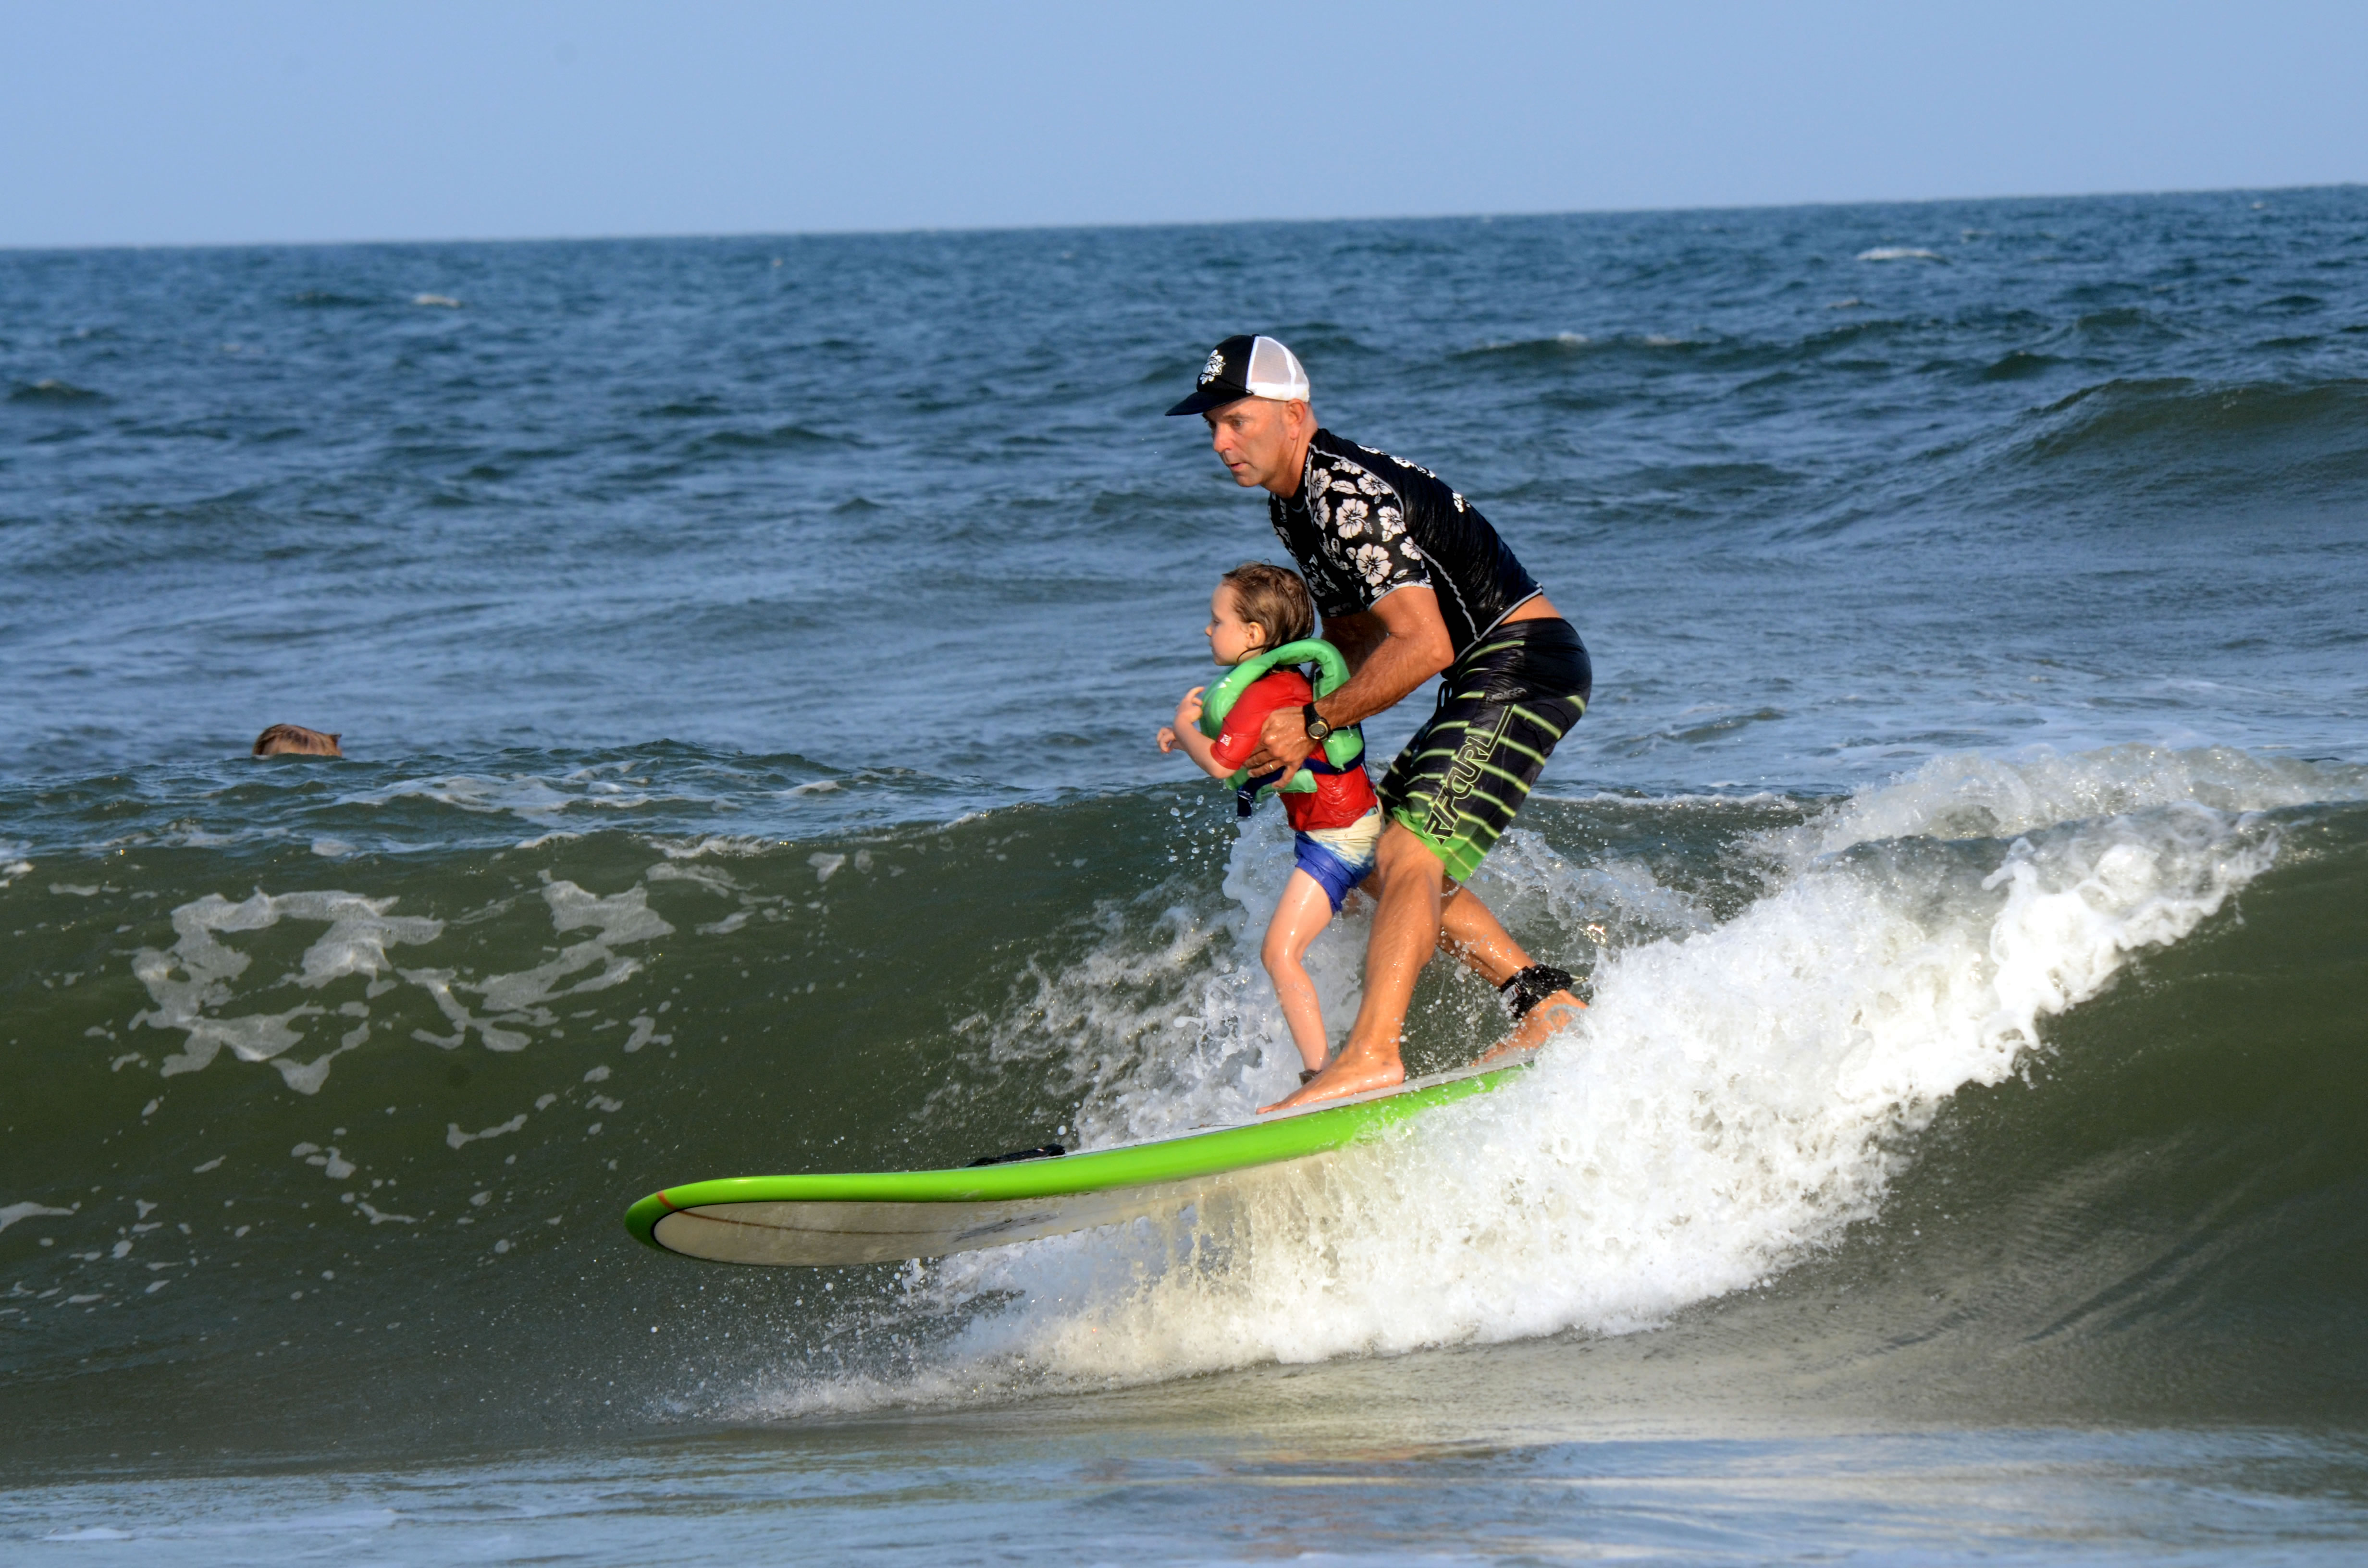 Jack Viorel, Indo Jax Surf Charities, Co-chair of the Wrightsville Beach Wahine Classic